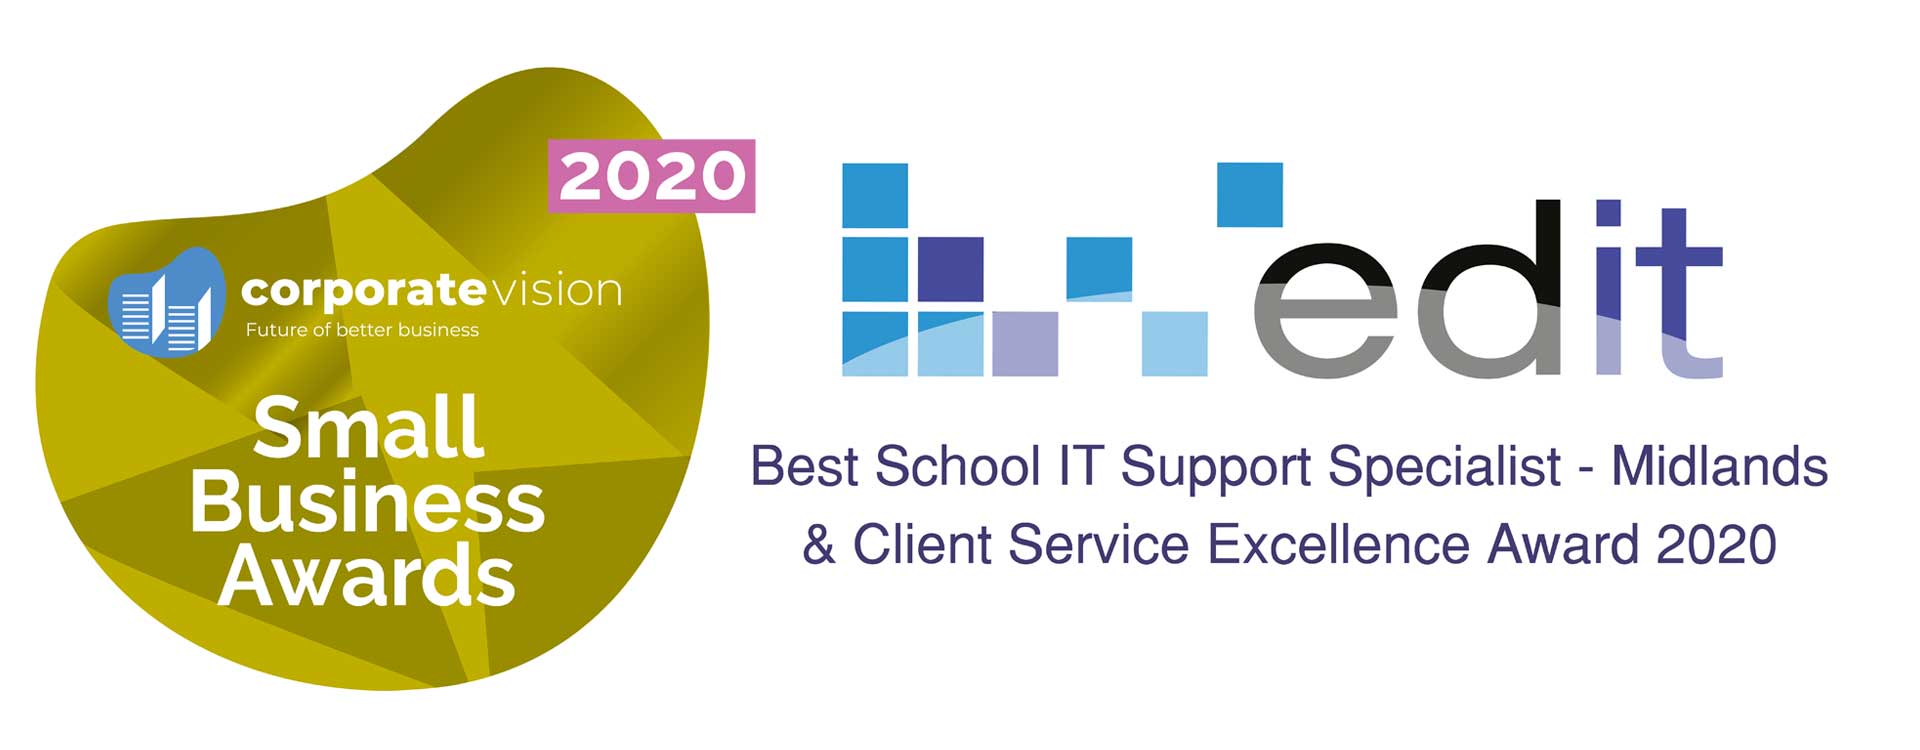 Small Business Award 2020 - Best Schools IT Support